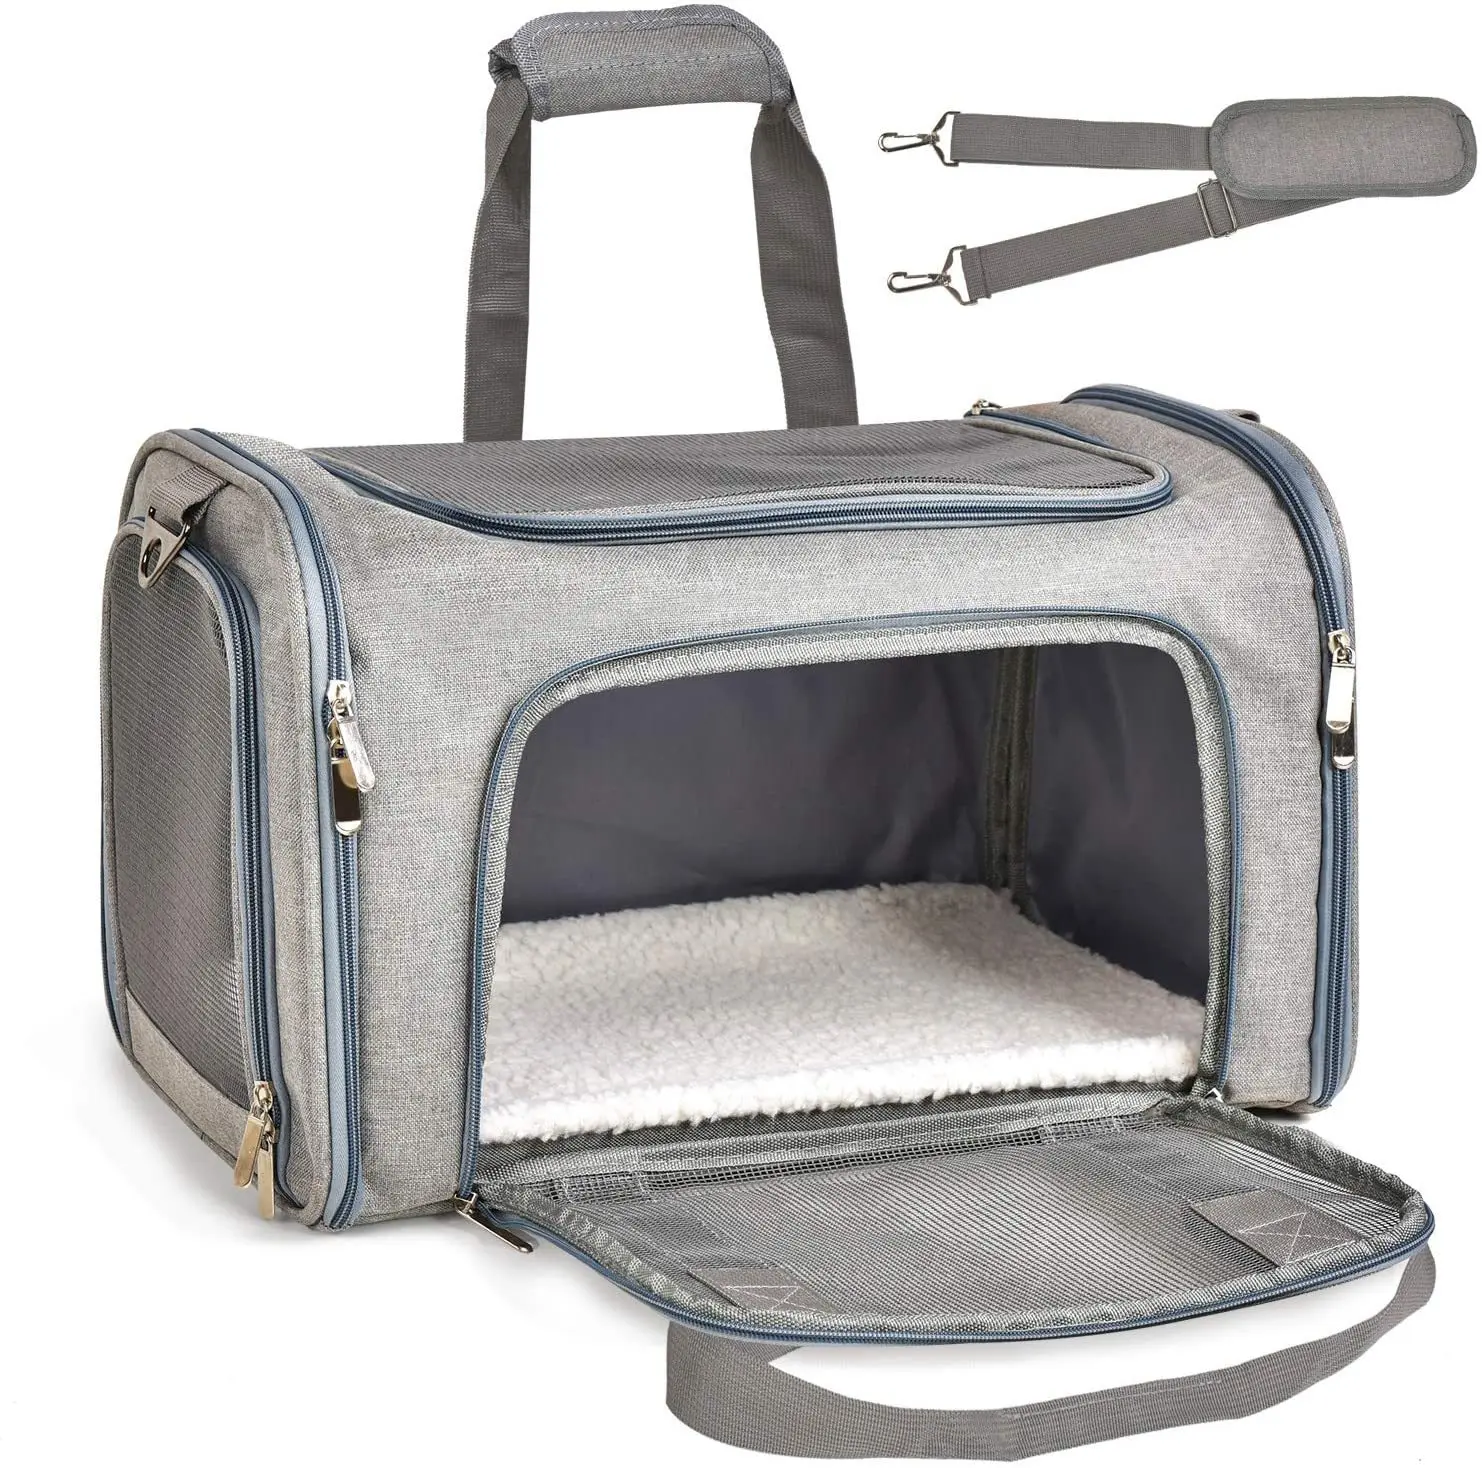 

Pet Carrier for Small Medium Cats Dogs Puppies Airline Approved Small Dog Carrier Soft Sided Collapsible Puppy Dog Travel Bag